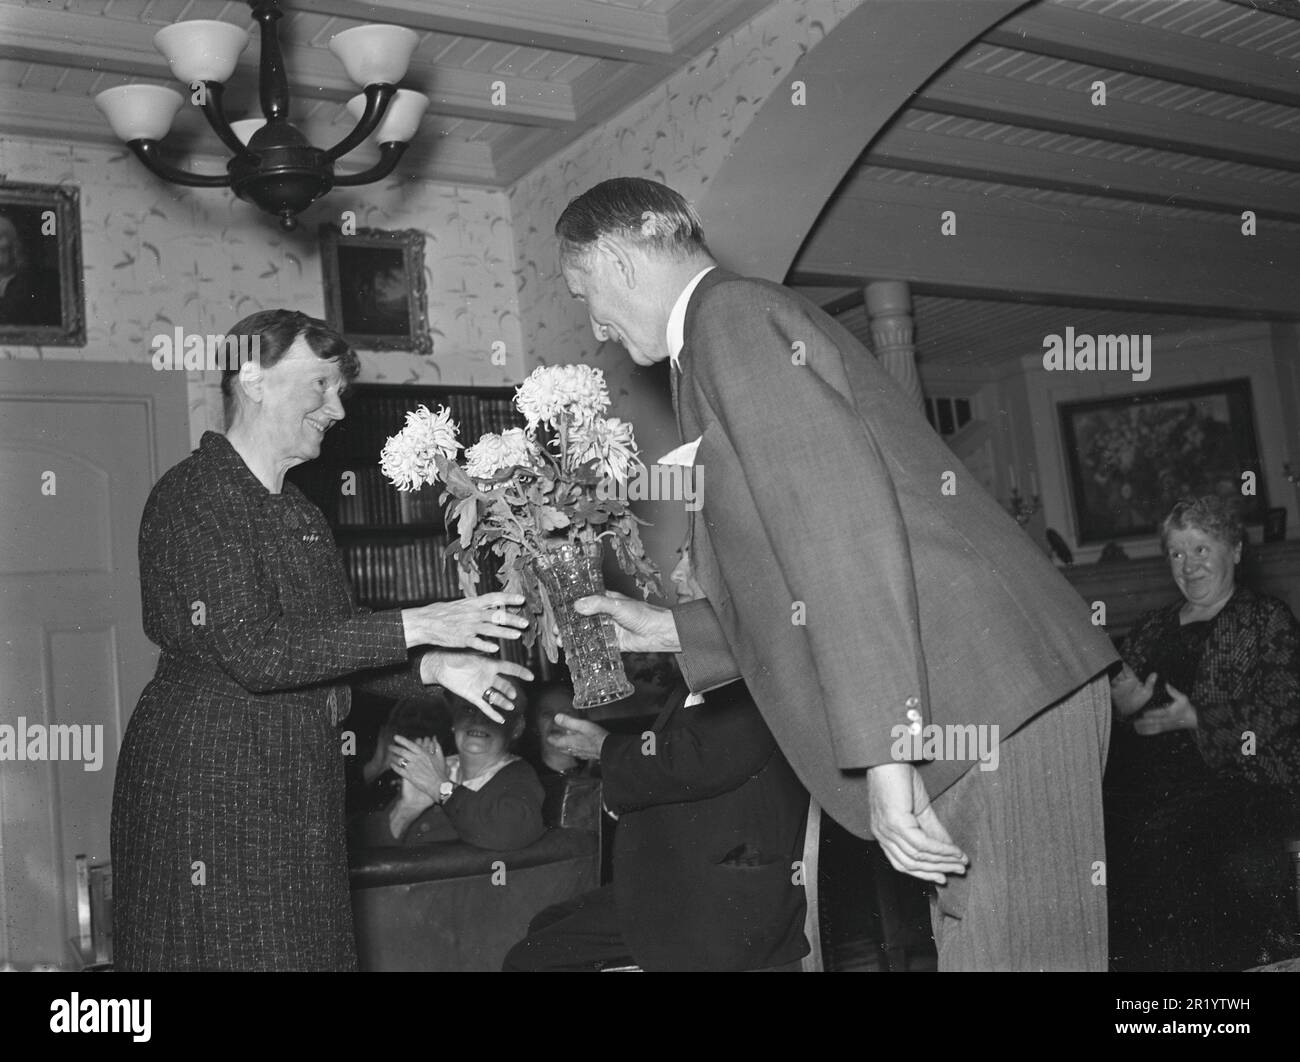 Birthday in the 1930s. An elderly lady recieves a flowers in a vase with peonies flowers by an equally old gentlemen, bowing politely when handing them over. People in the room behind them are applauding. They are residents of the retirement home Höstsol where older actors live in their golden days. November 1939. Kristoffersson ref 40-4 Stock Photo